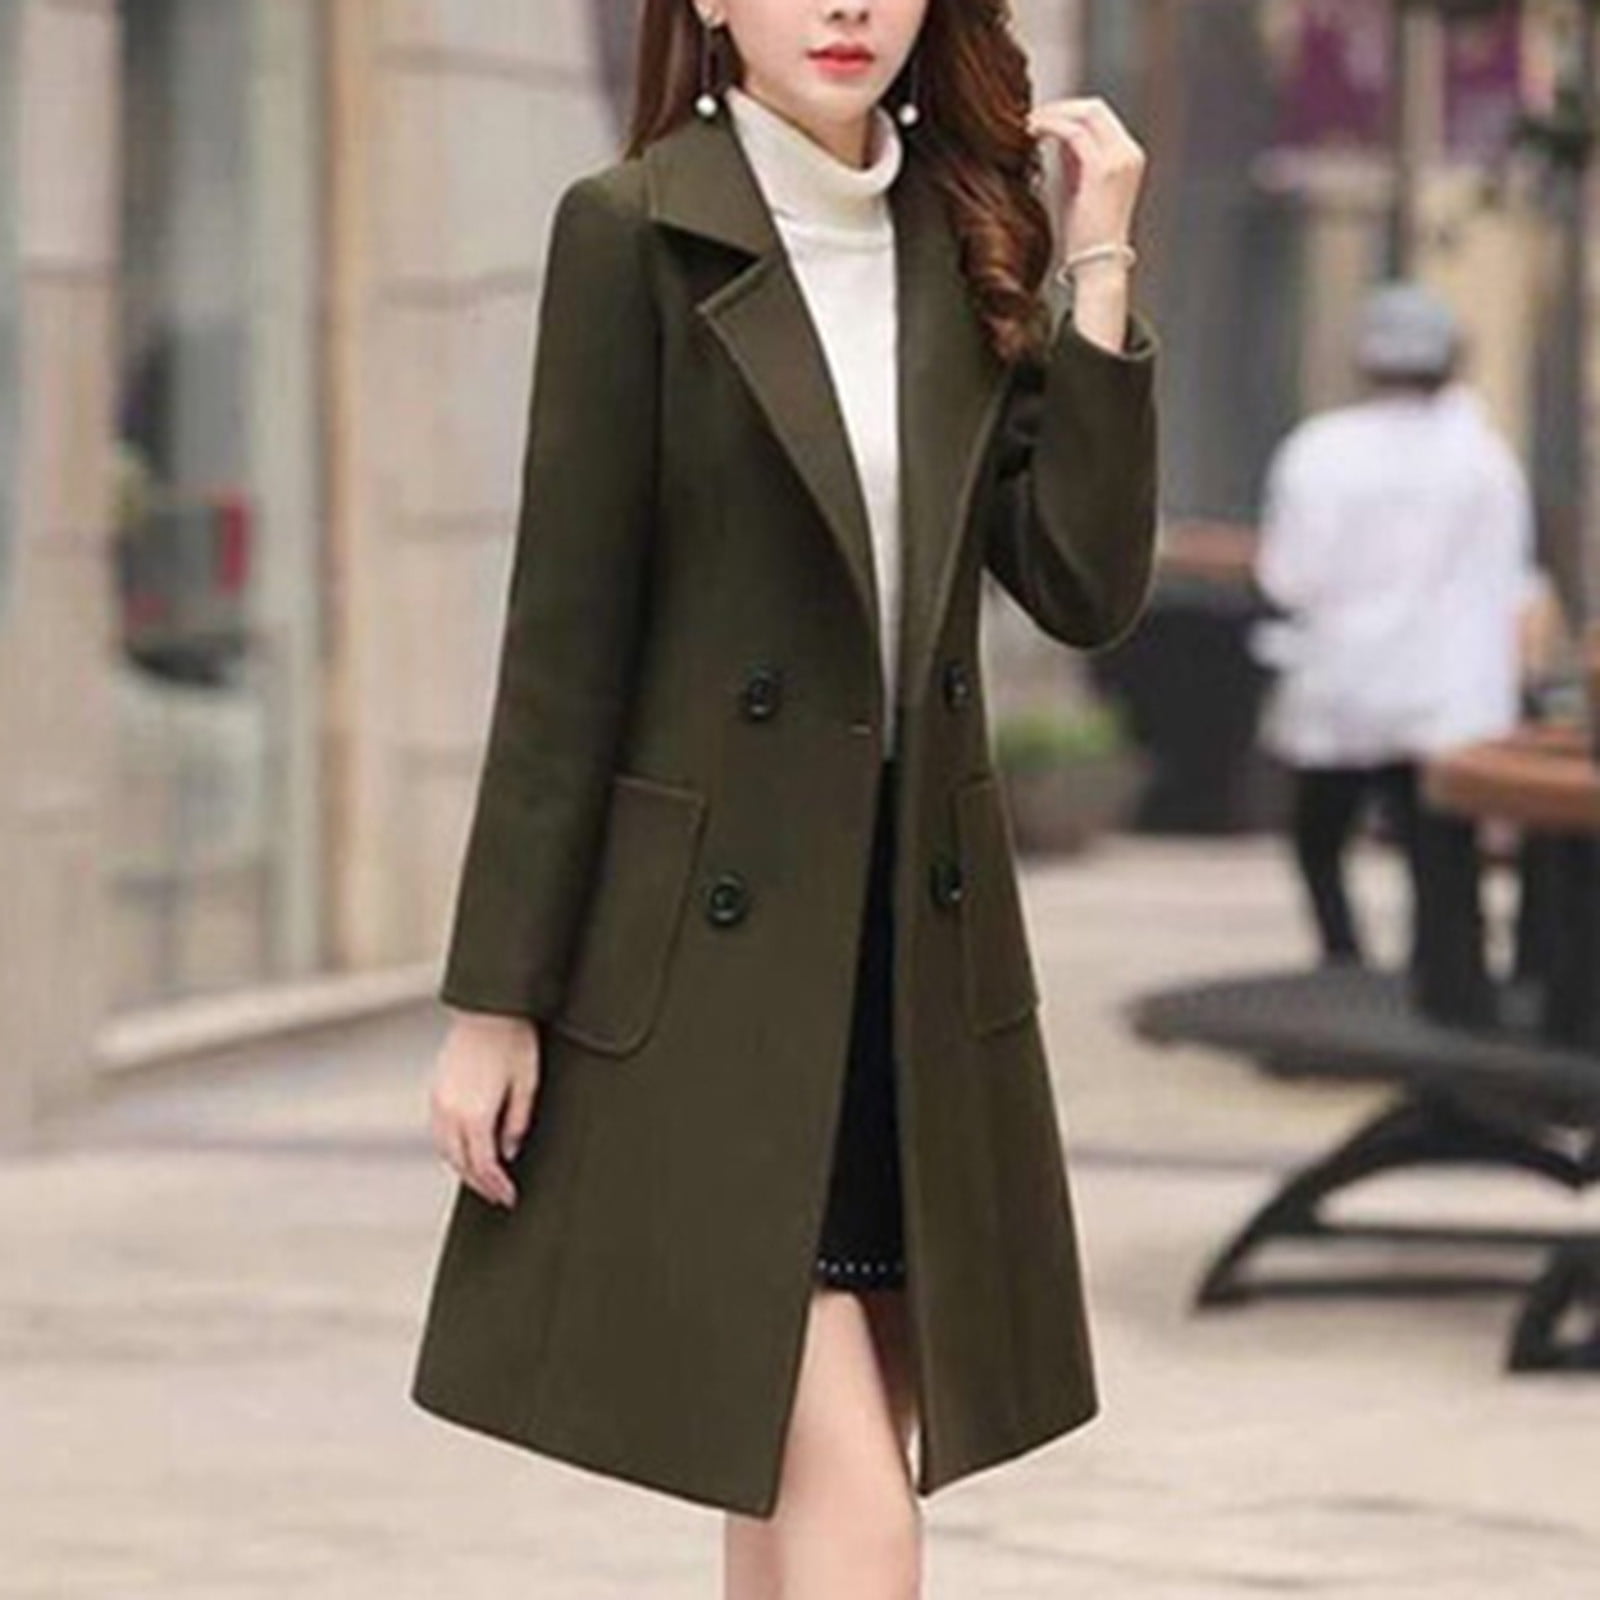 Mens Stylish Trench Coat Removable Faux Fur Collar Topscoat Double Breasted Winter Overcoat Warm Long Pea Coat 